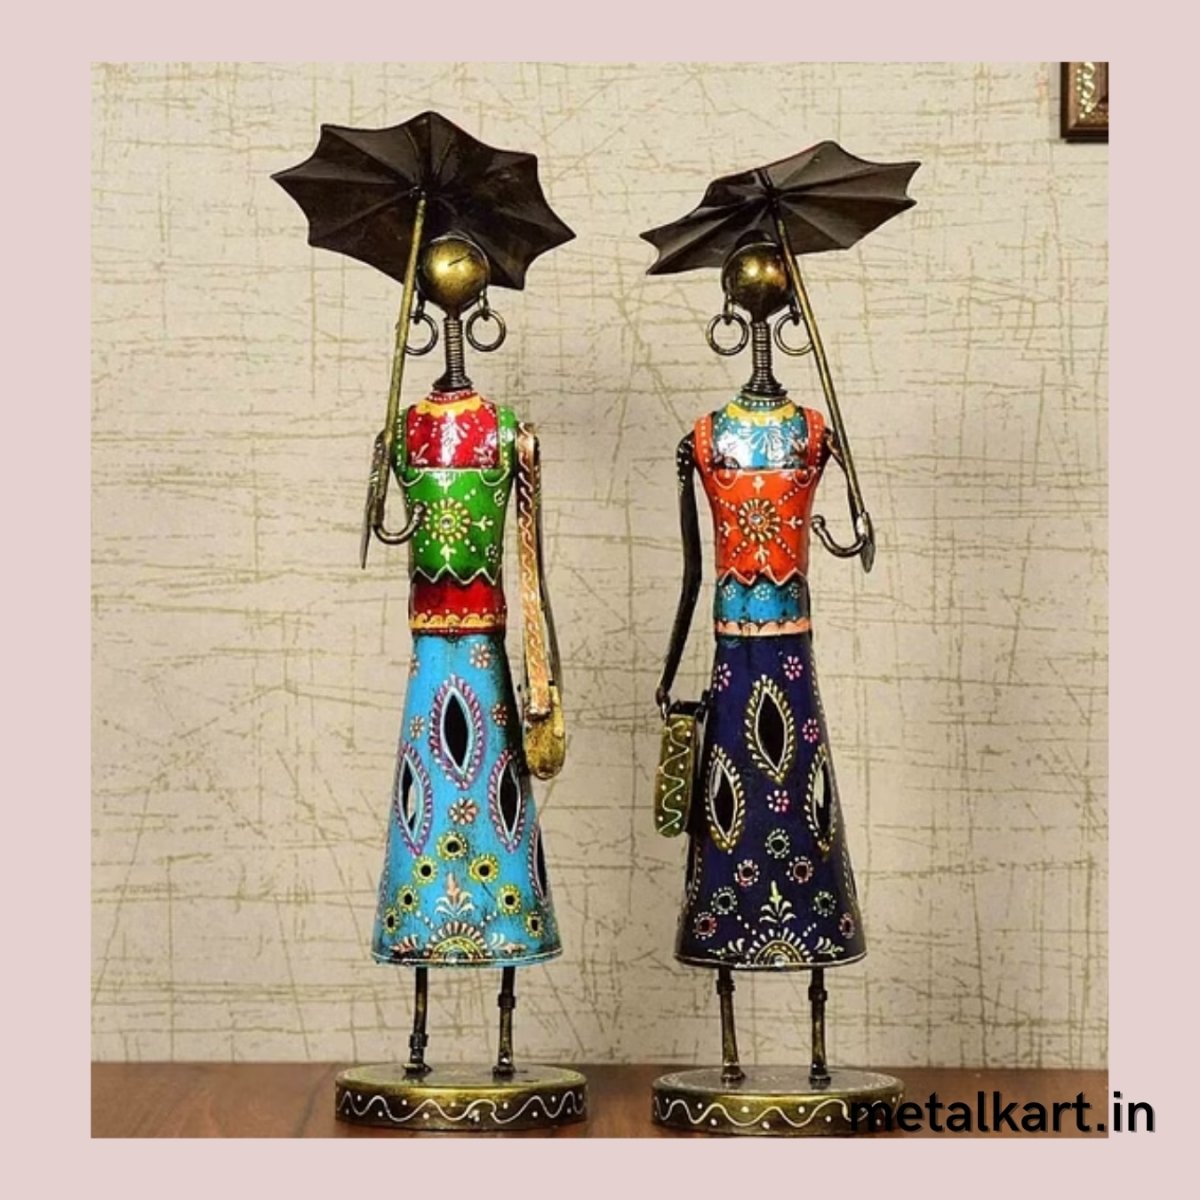 Handcrafted Japanese Ladies with Traditional Umbrella Set of 2 (15*4*4 Inches)